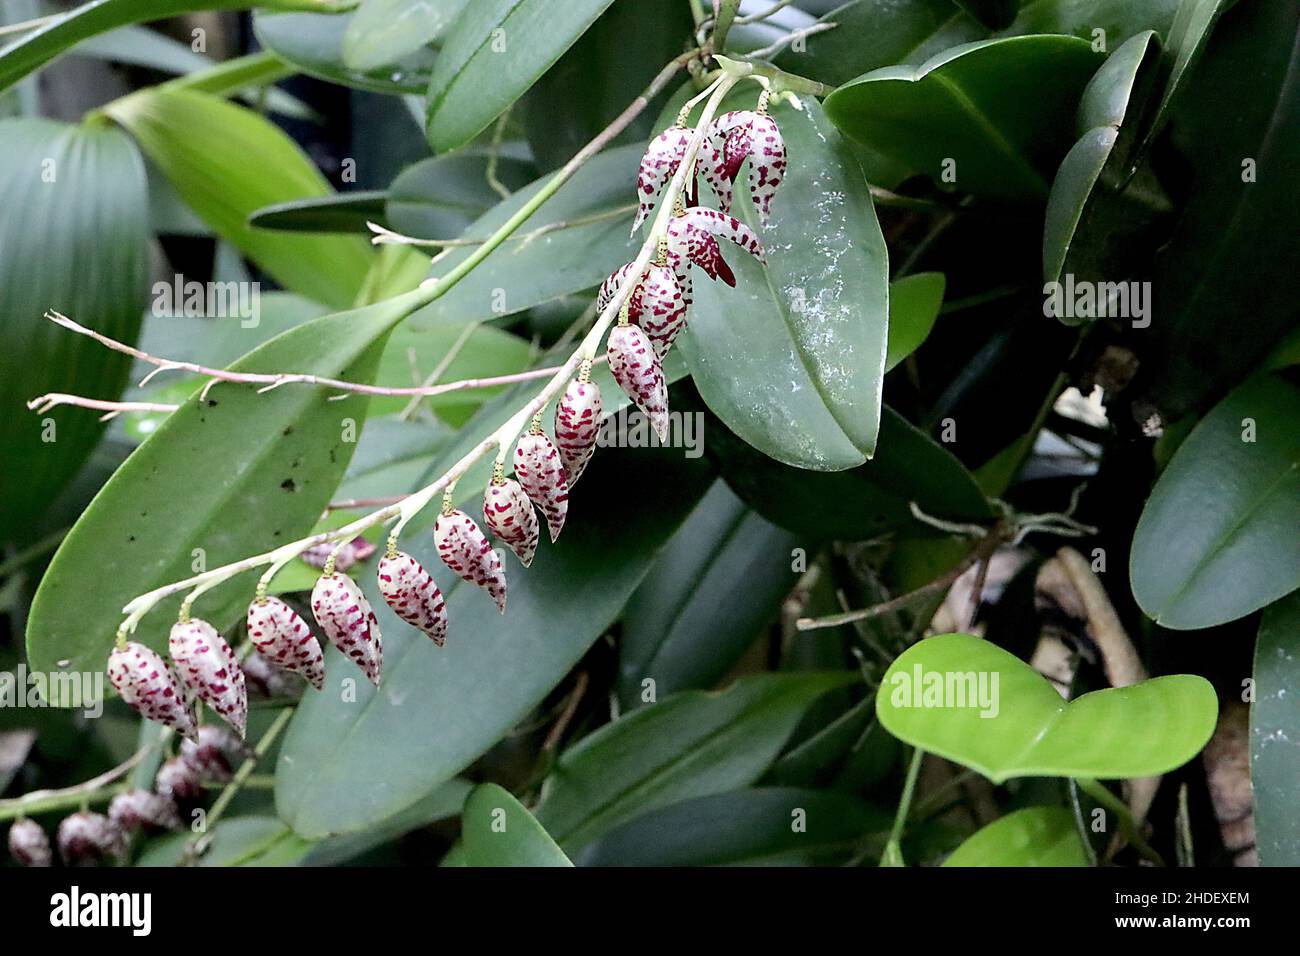 Pleurothallis restrepioides raceme of small bell-shaped white flowers with purple speckles, January, England, UK Stock Photo